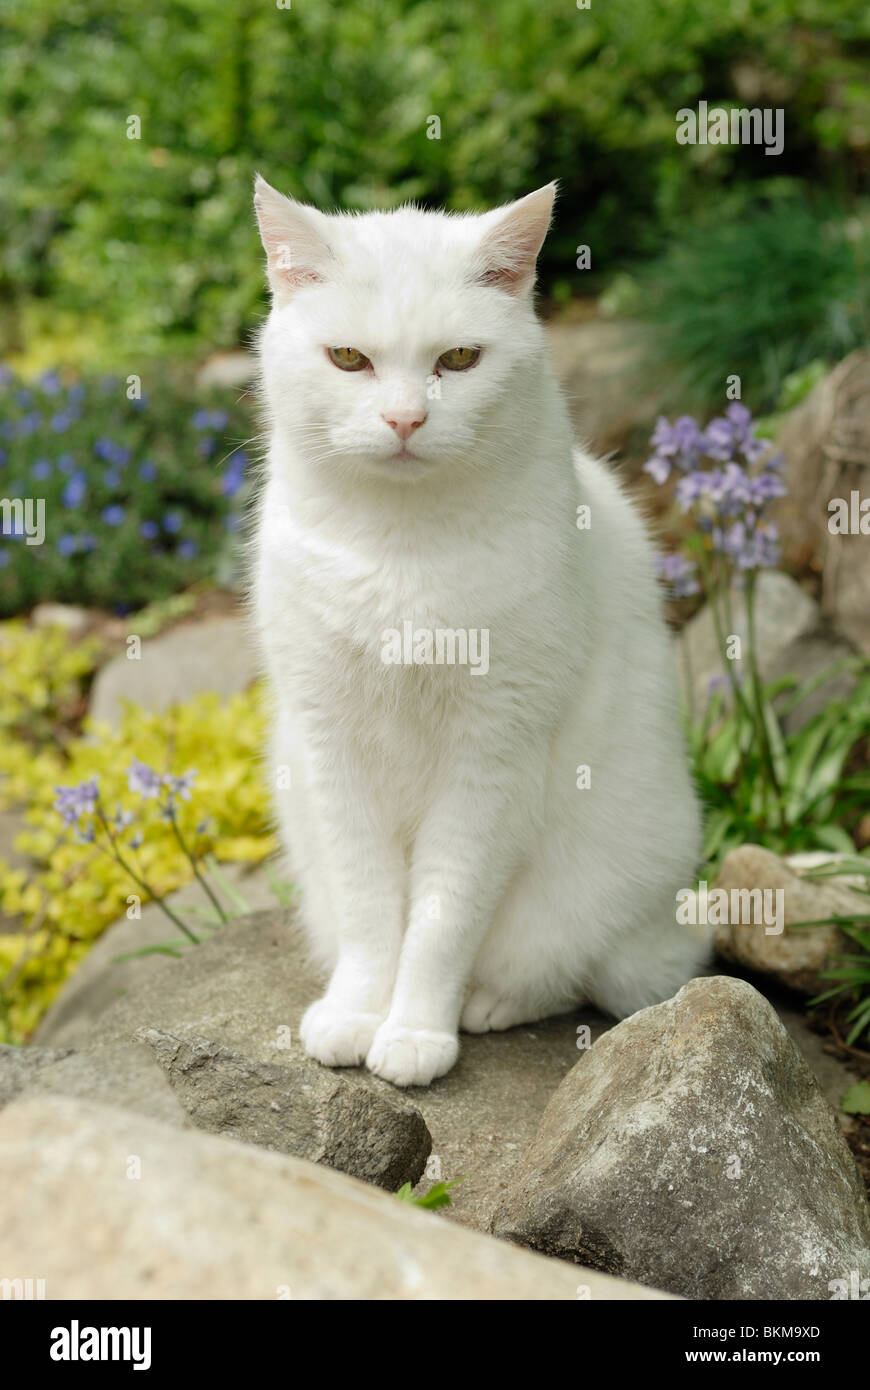 All White domestic Cat sitting on a rock in a garden. Stock Photo